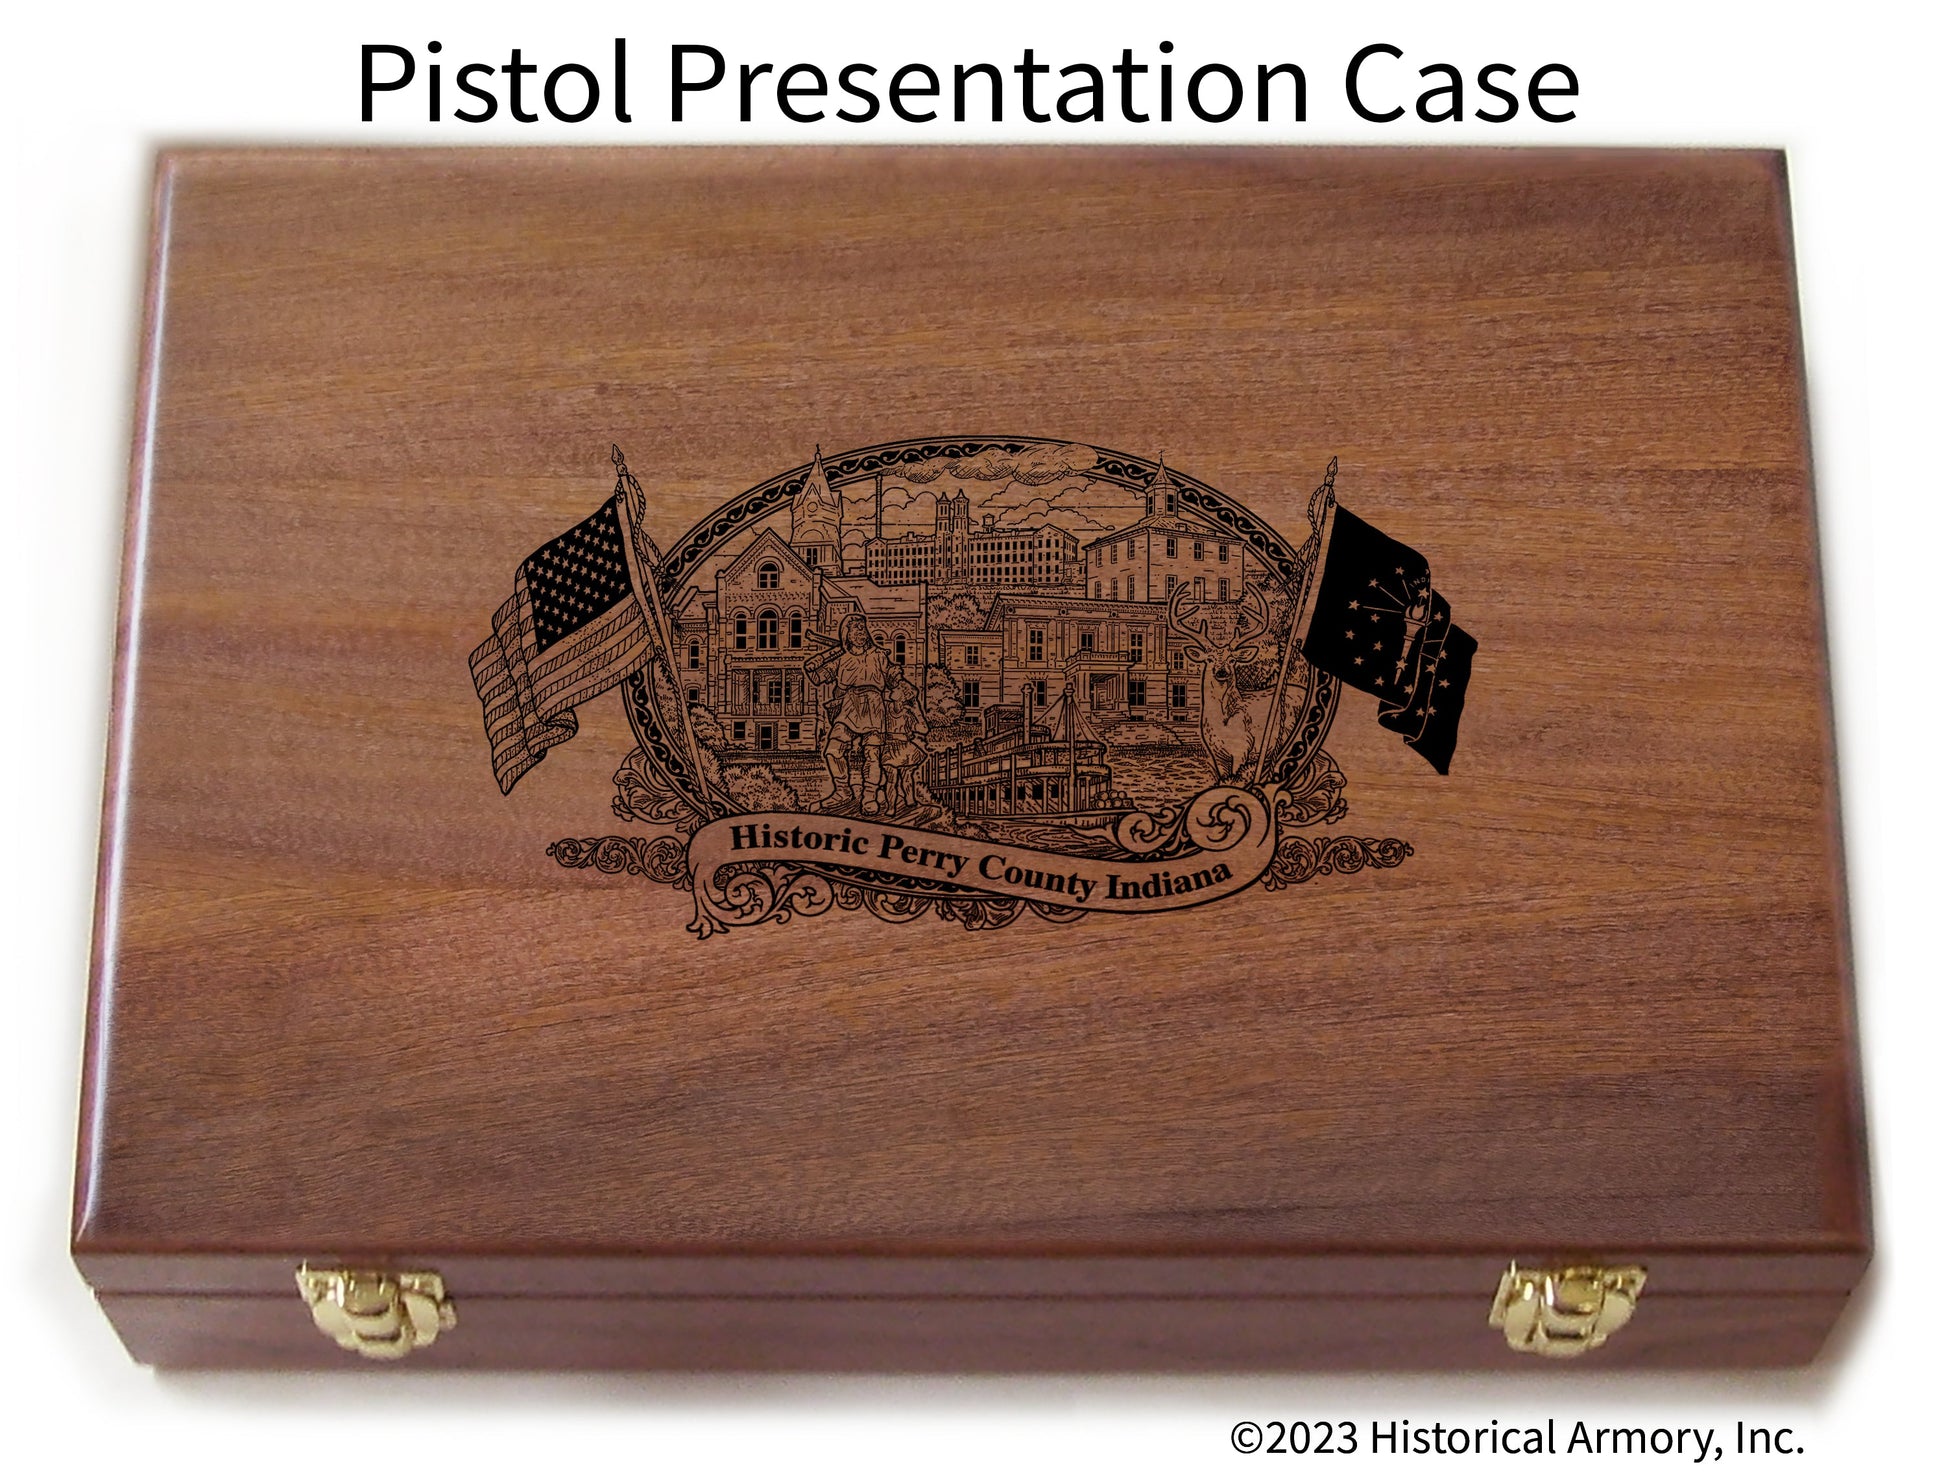 Perry County Indiana Engraved .45 Auto Ruger 1911 Presentation Case